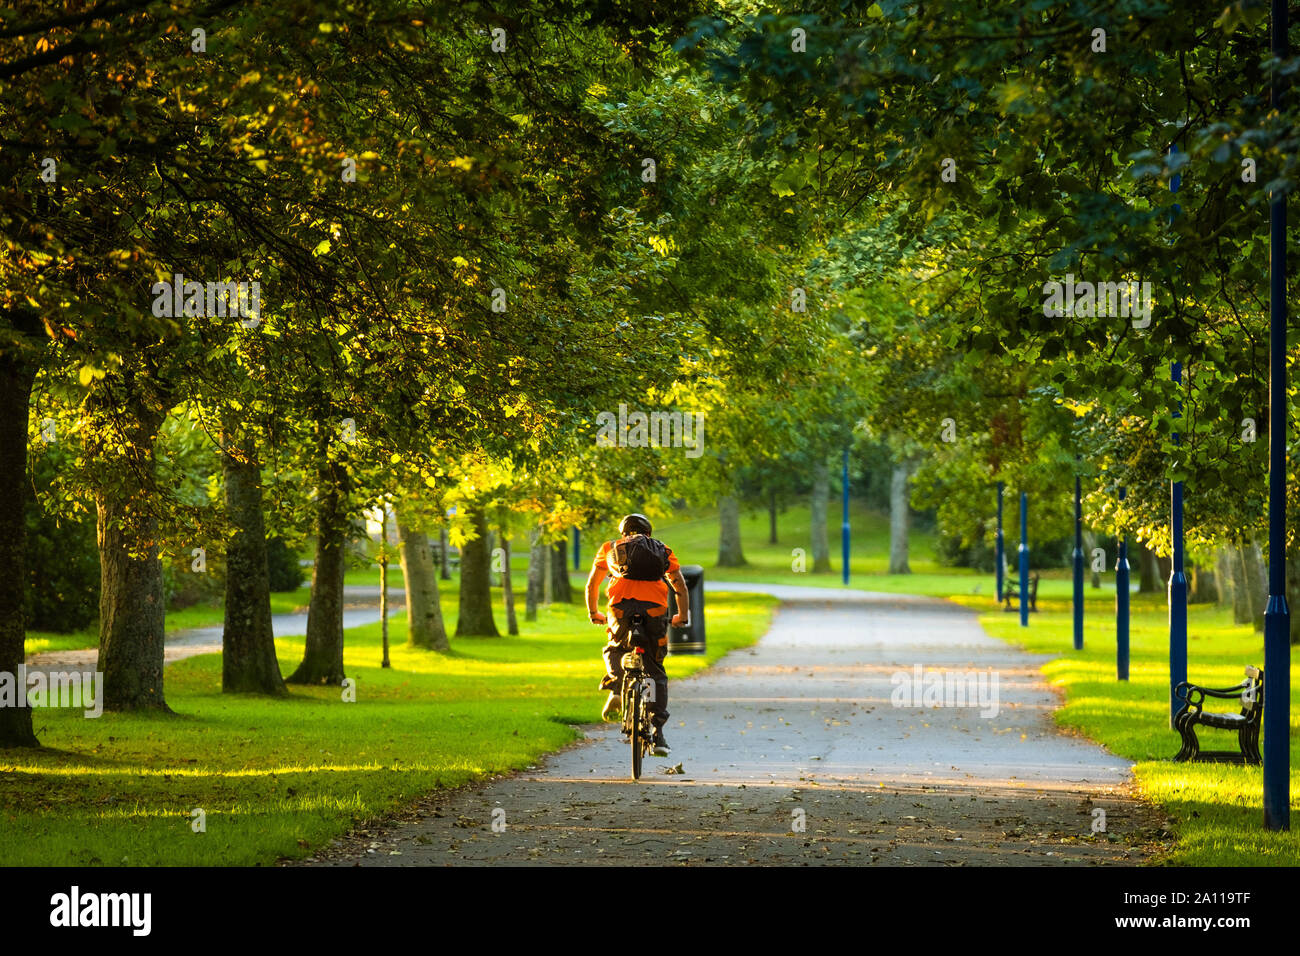 Aberystwyth, Wales, UK. 23rd Sept, 2019. UK Weather: A man cycling down Plascrug Avenue at daybreak on a bright and sunny Equinox morning, September 23 2019, the first day of official autumn in the northern hemisphere. Today the length of the day and night are roughy equal. Photo Credit: keith morris/Alamy Live News Stock Photo